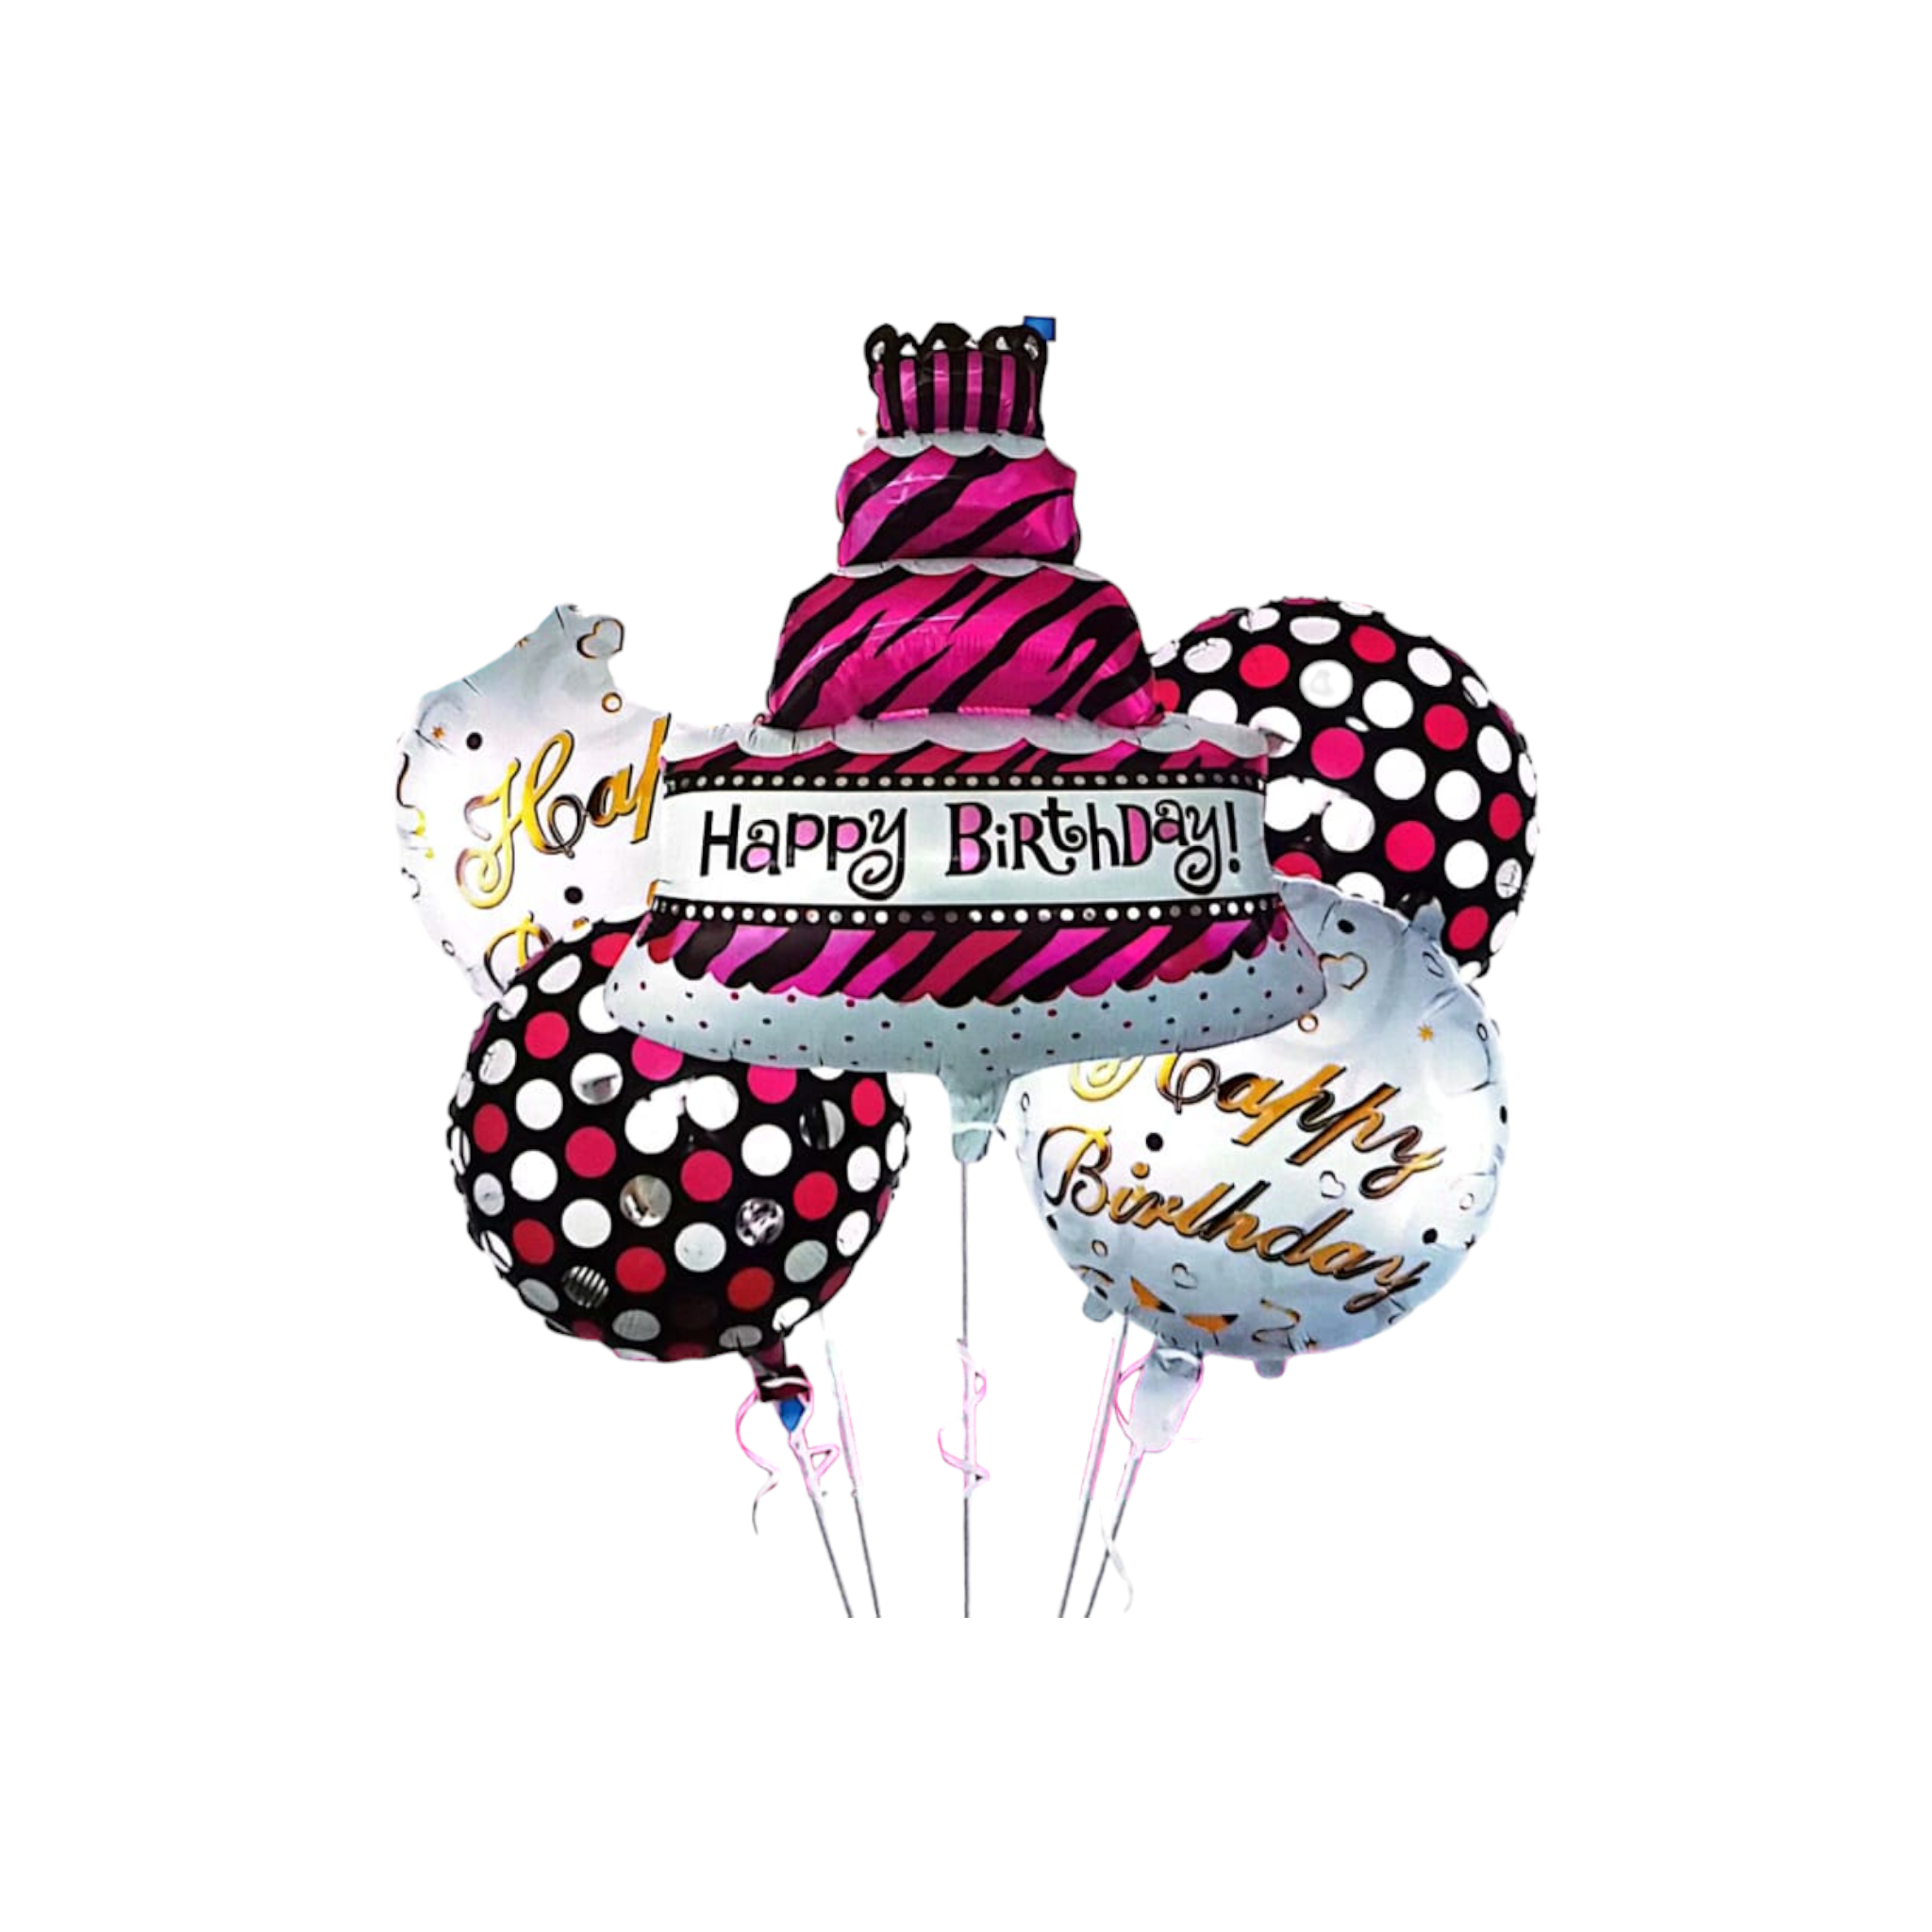 Happy Birthday Foil Balloons 5pc Bouquet Set Pink